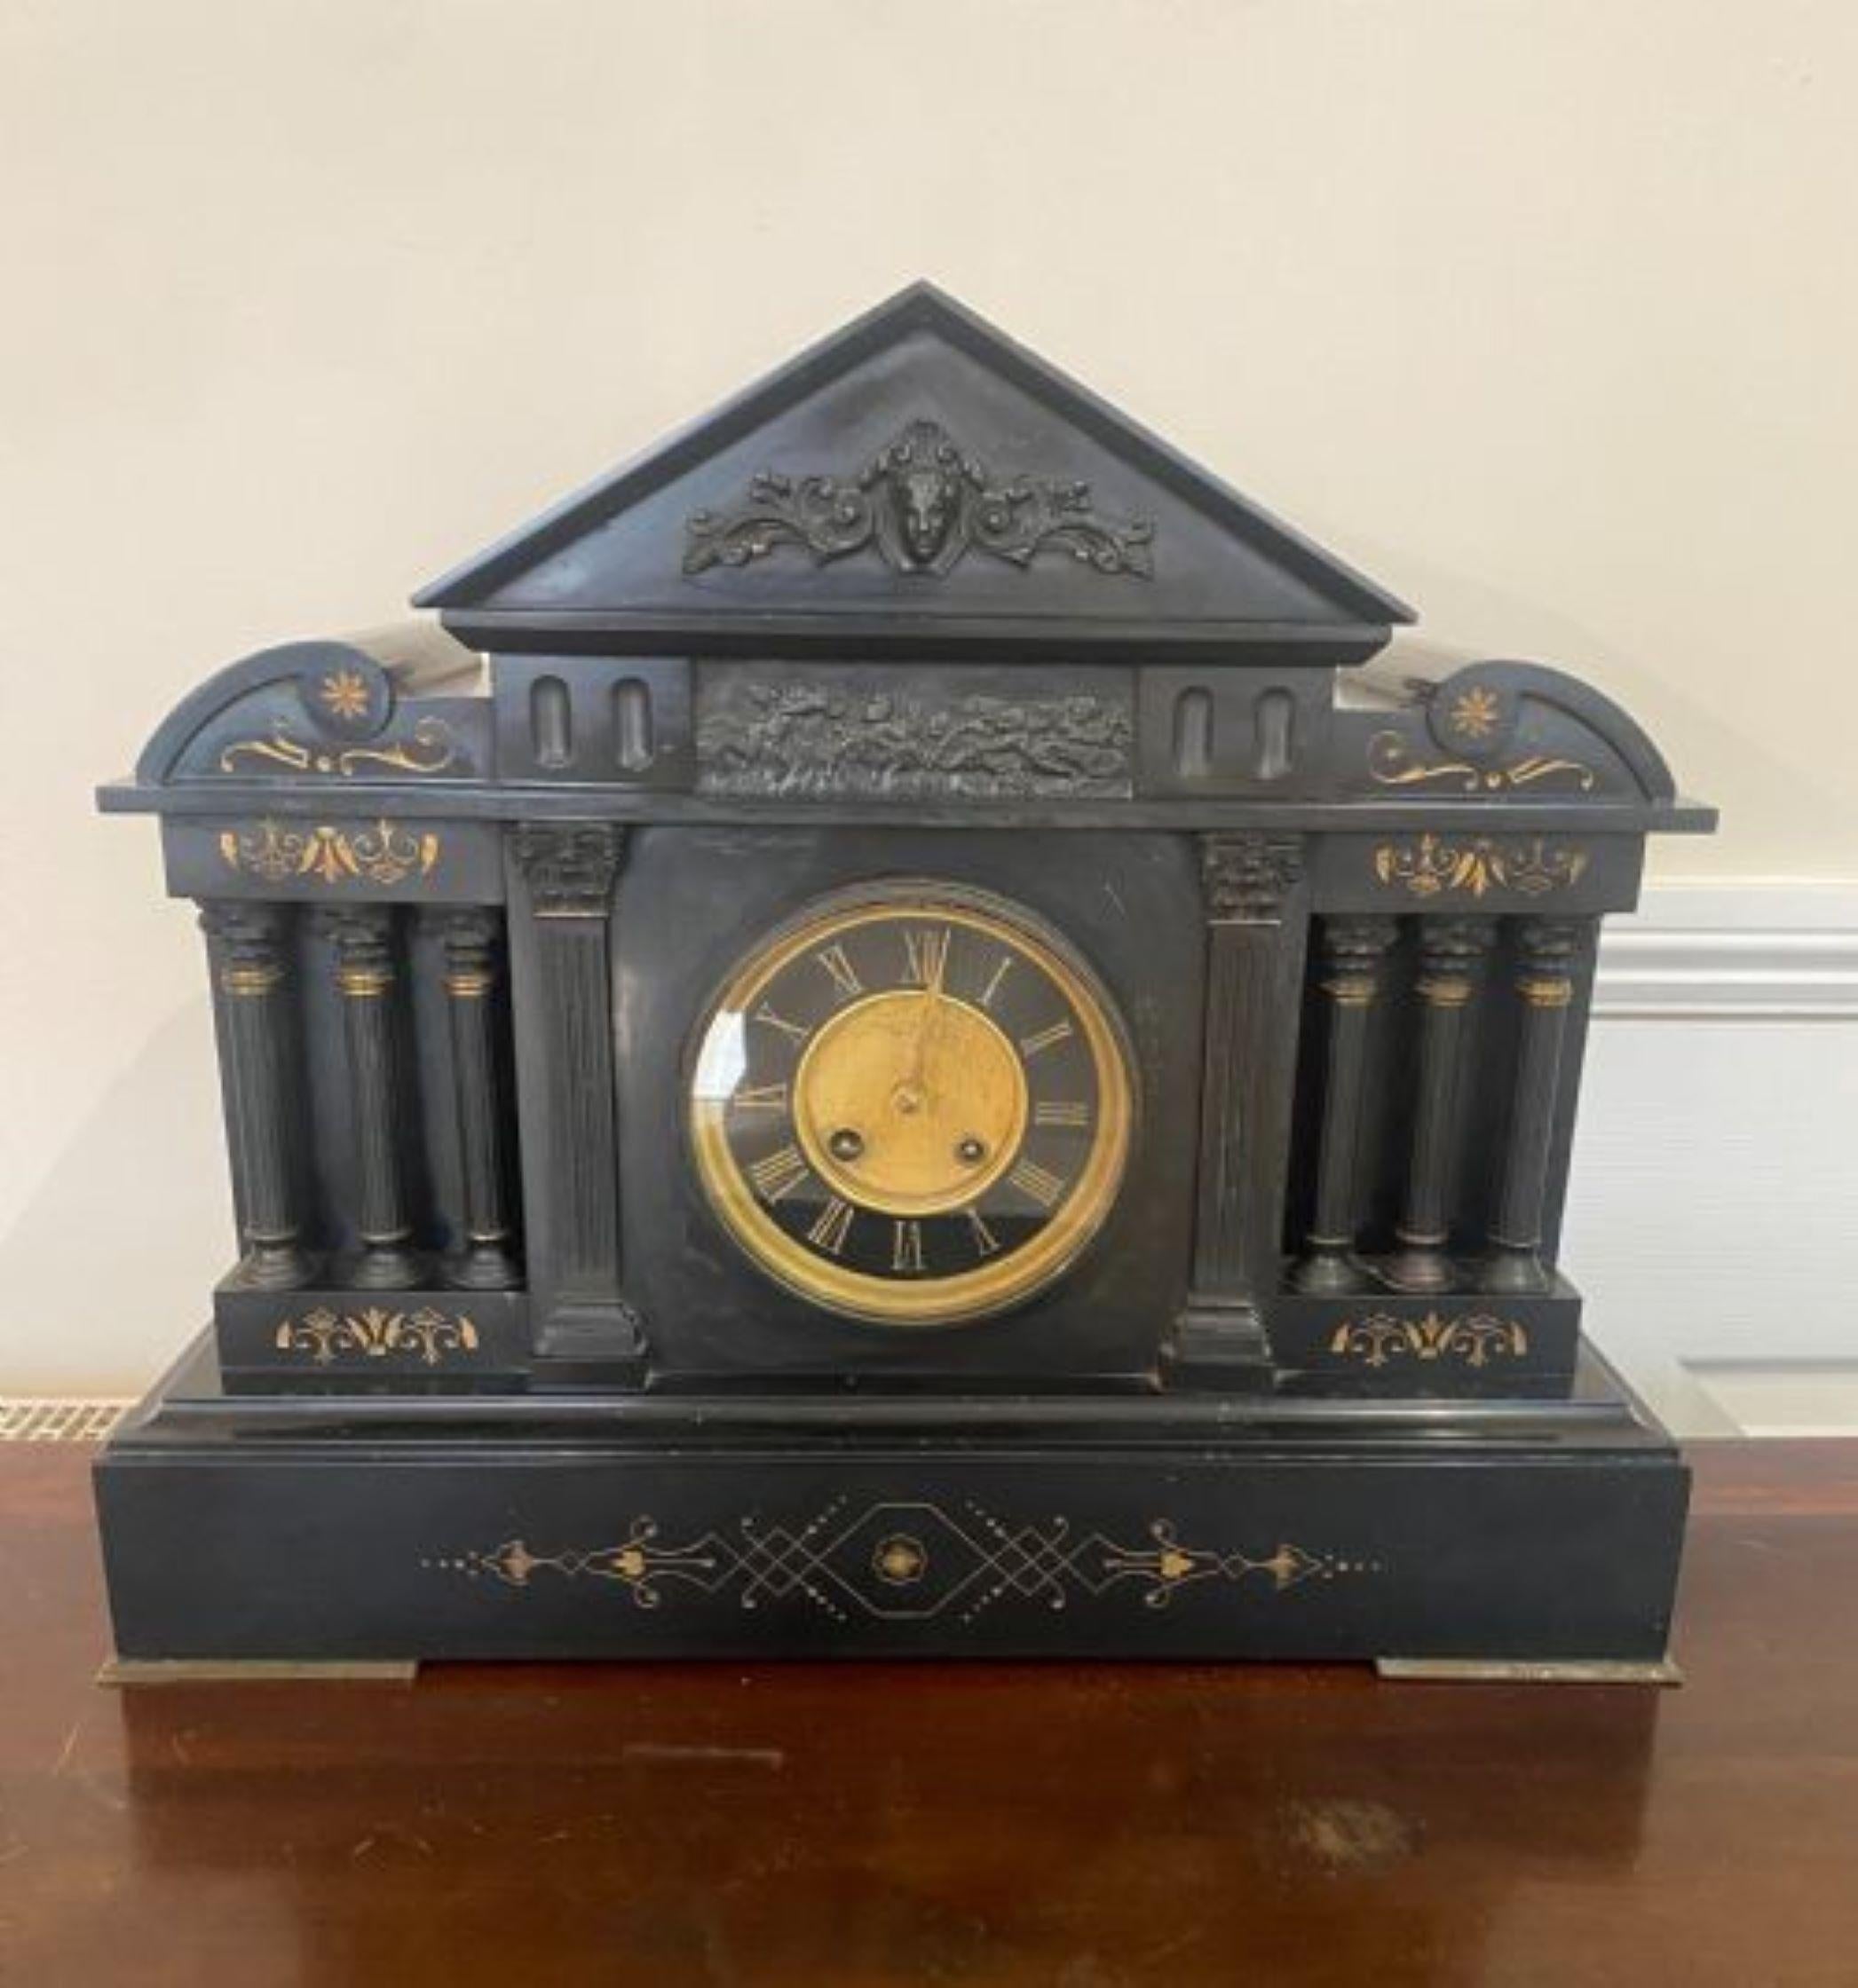 Large quality antique Victorian marble mantle clock having a quality ornate marble case with a circular brass dial, original hands with a eight day movement striking the hour and half hour on a gong. With original key
Please note all of our clocks